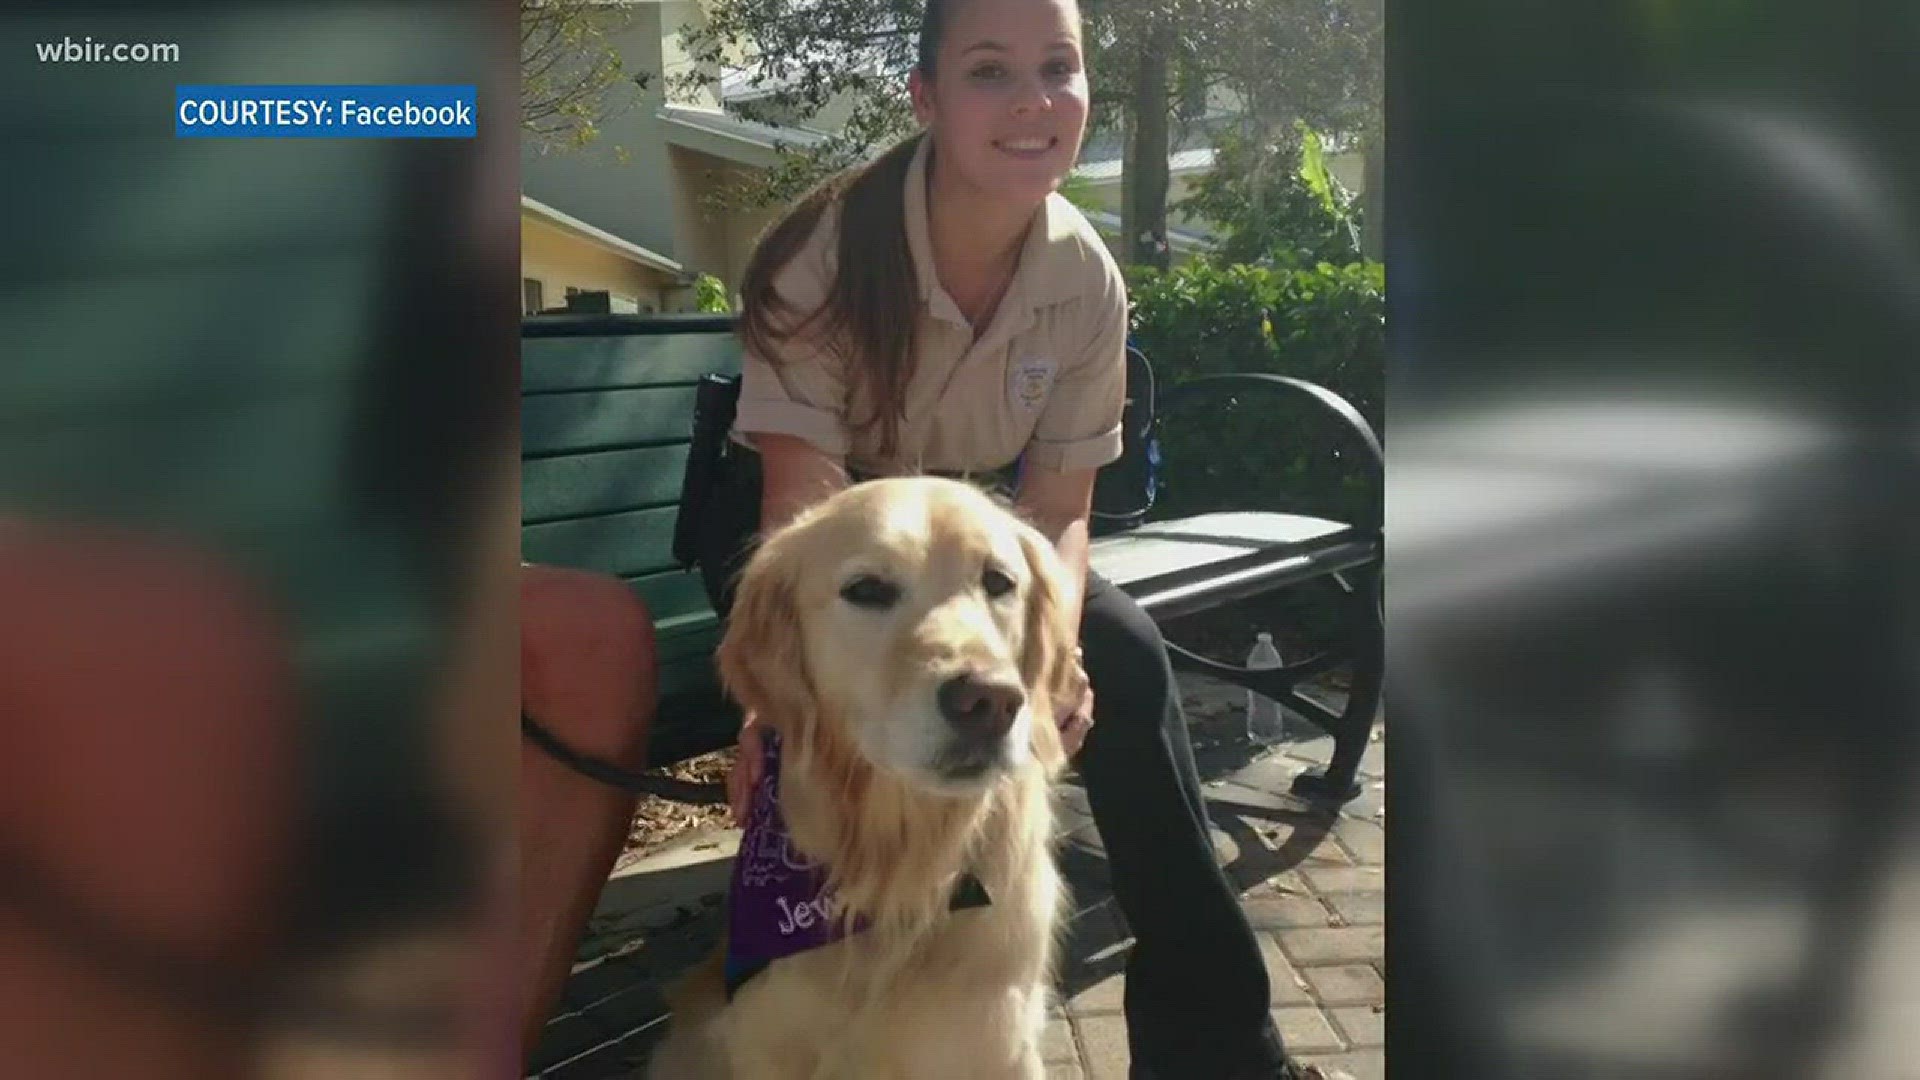 Jewel the comfort dog visit Parkland, Florida as many grieve the loss of 17 lives.